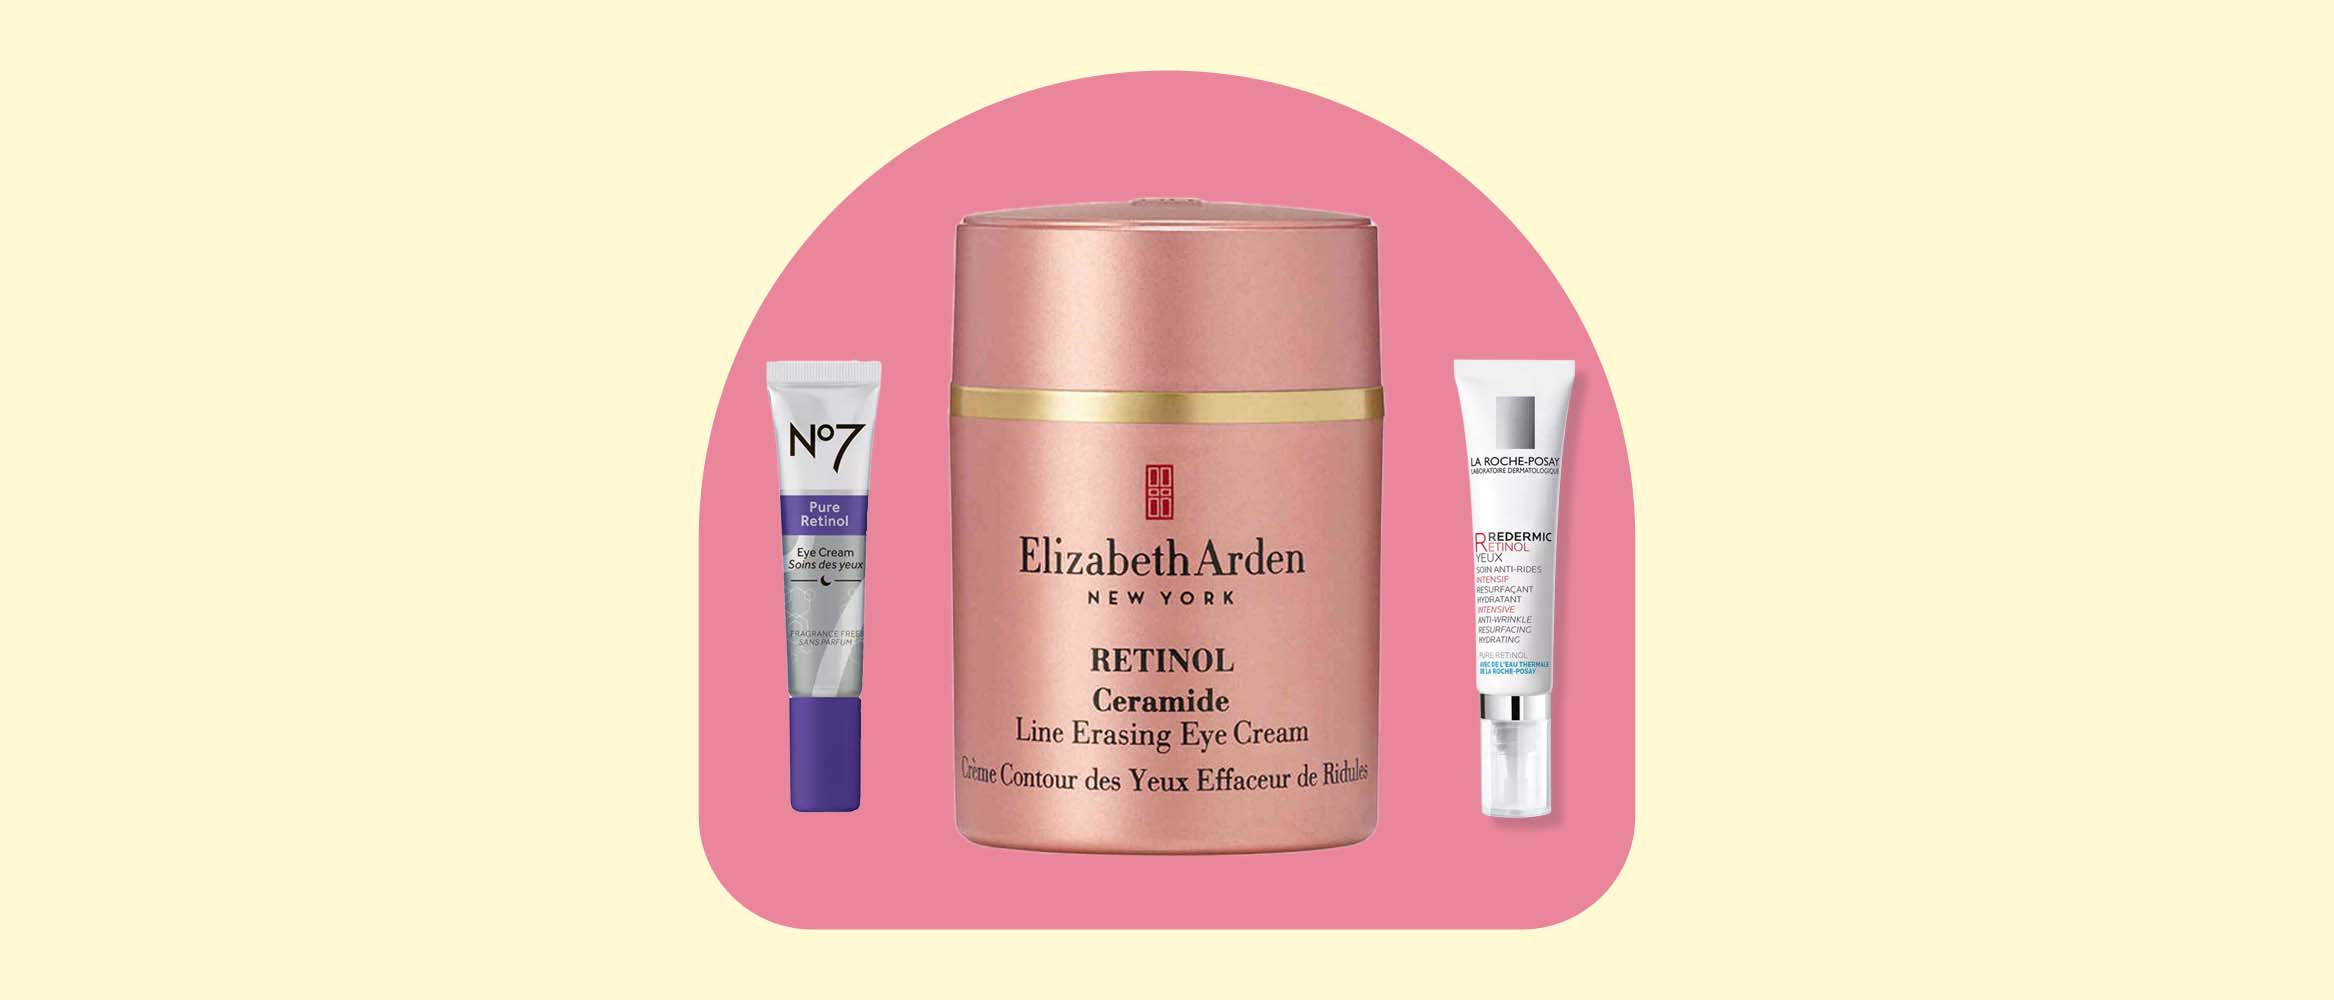 three of the best skincare products including Elizabeth Arden, No 7, La Roche-Posay